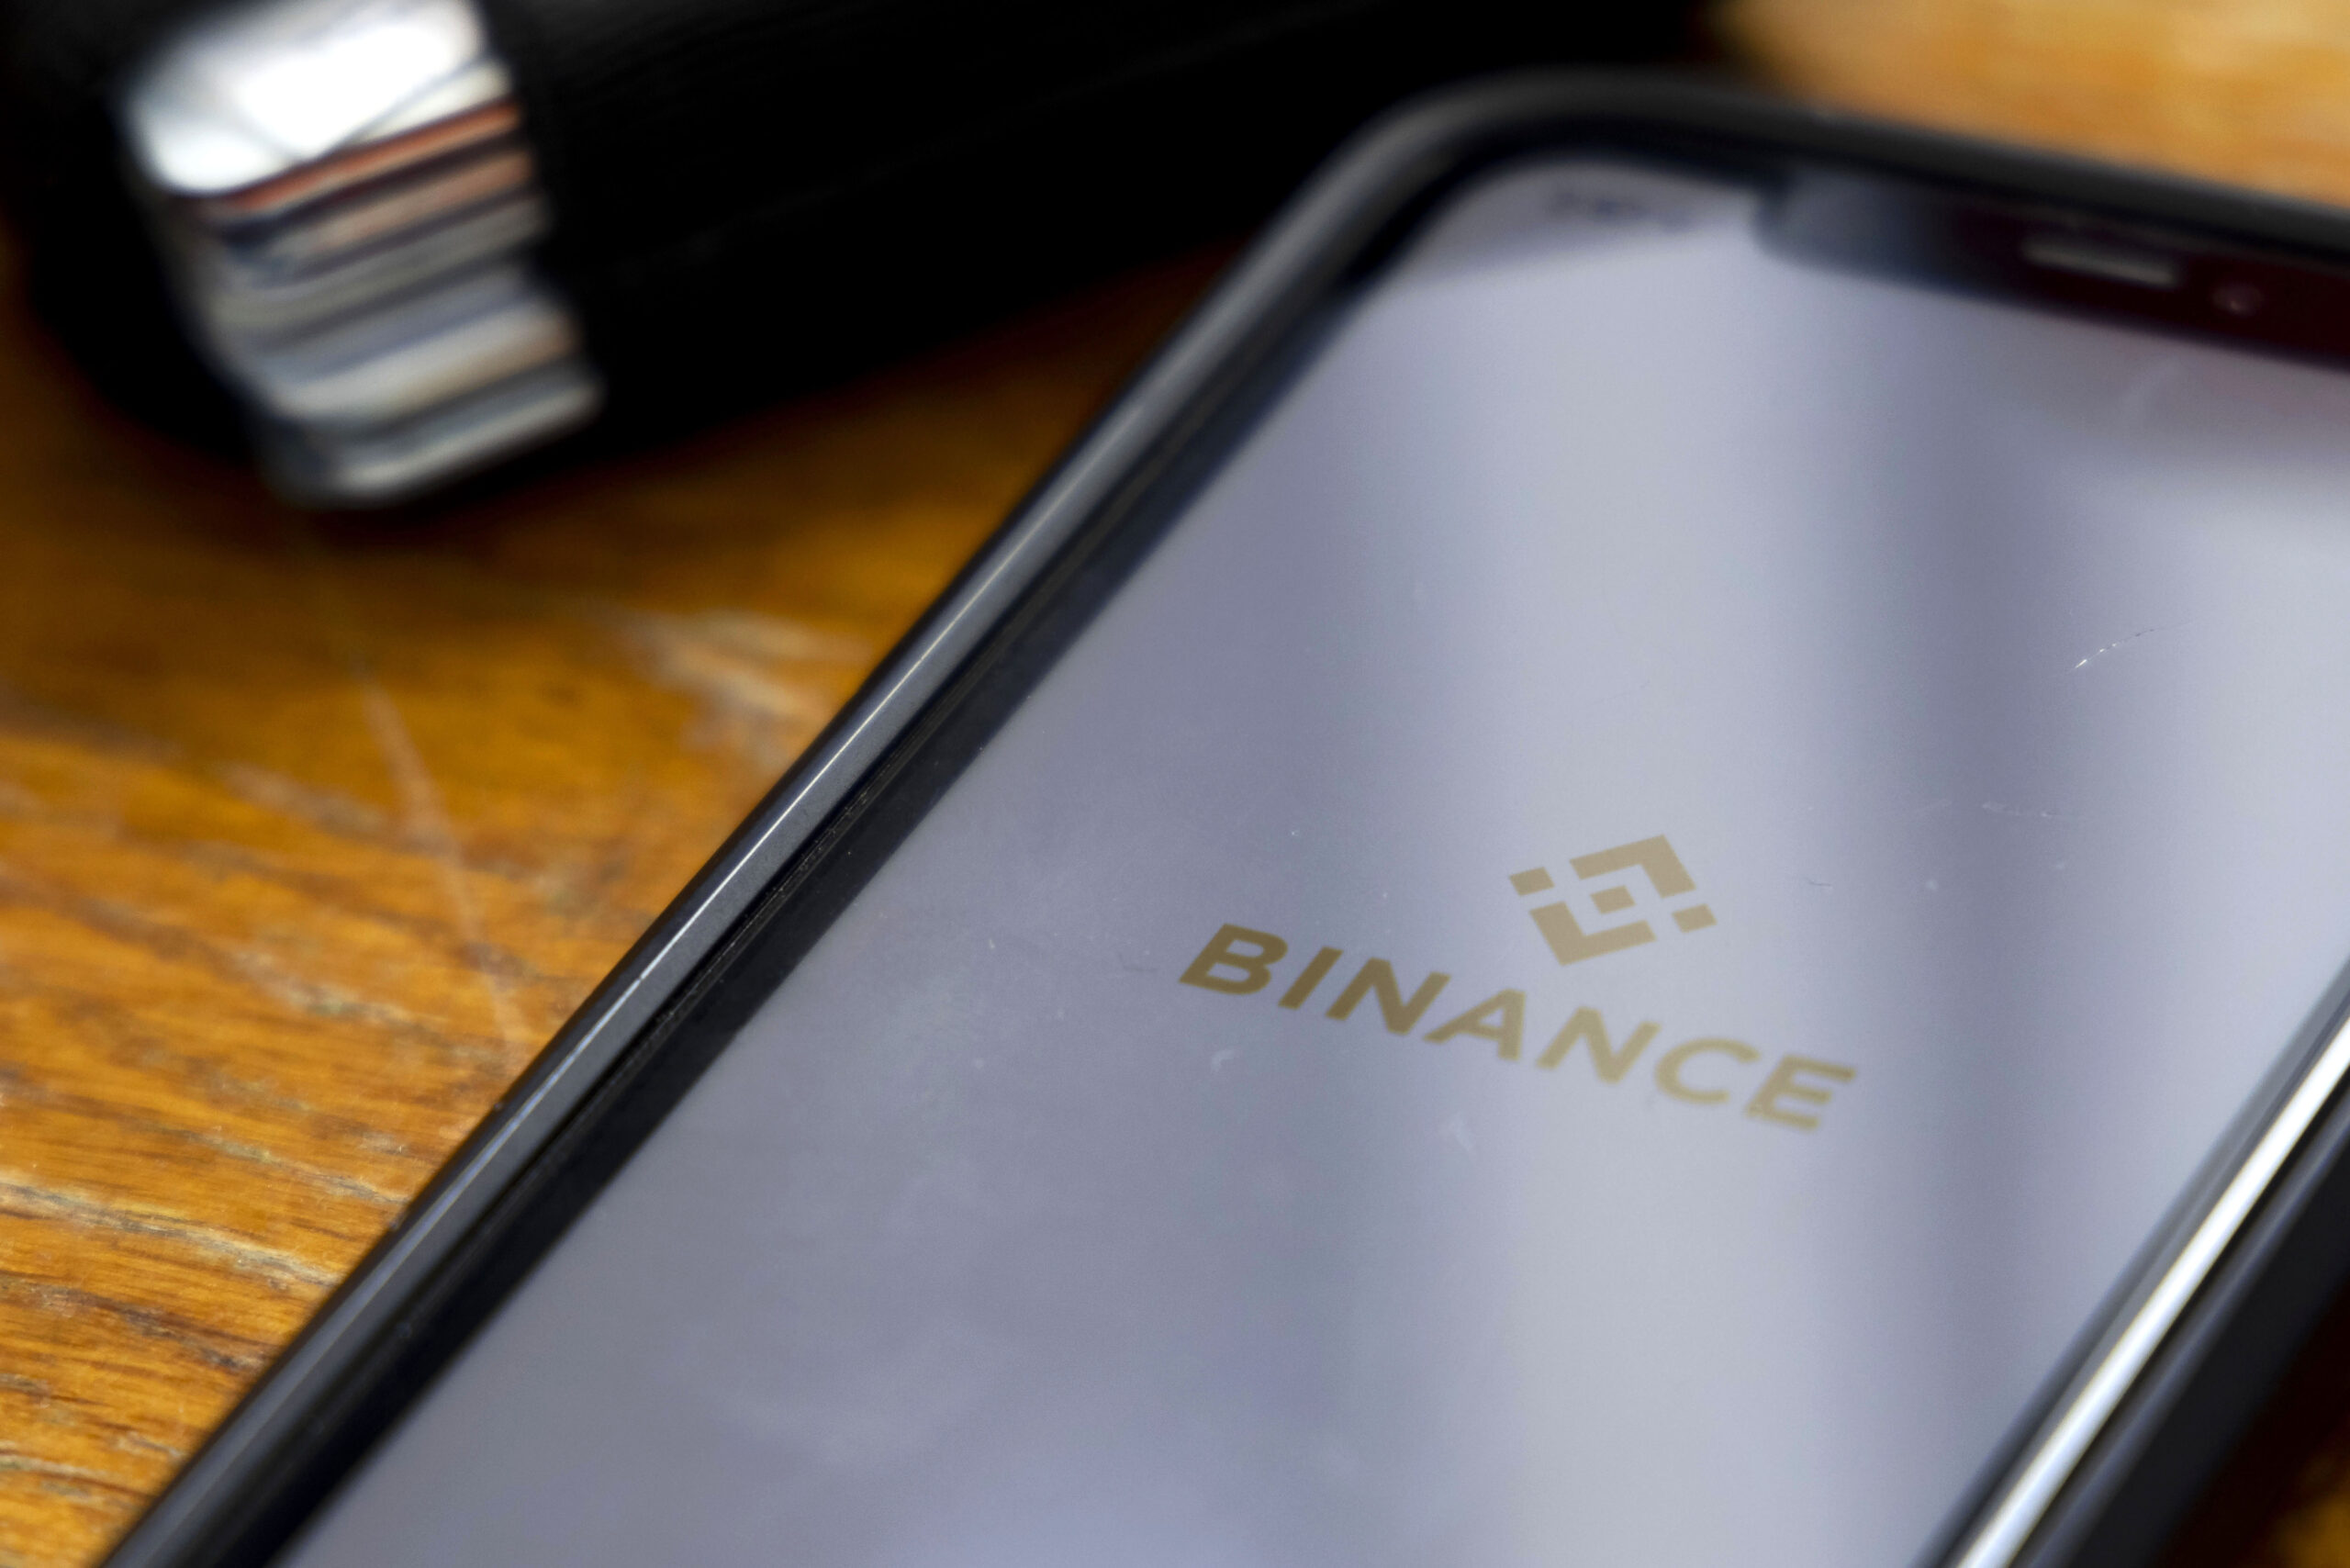 Binance.US Secures Appeal Victory for Florida Money Services License Reinstatement